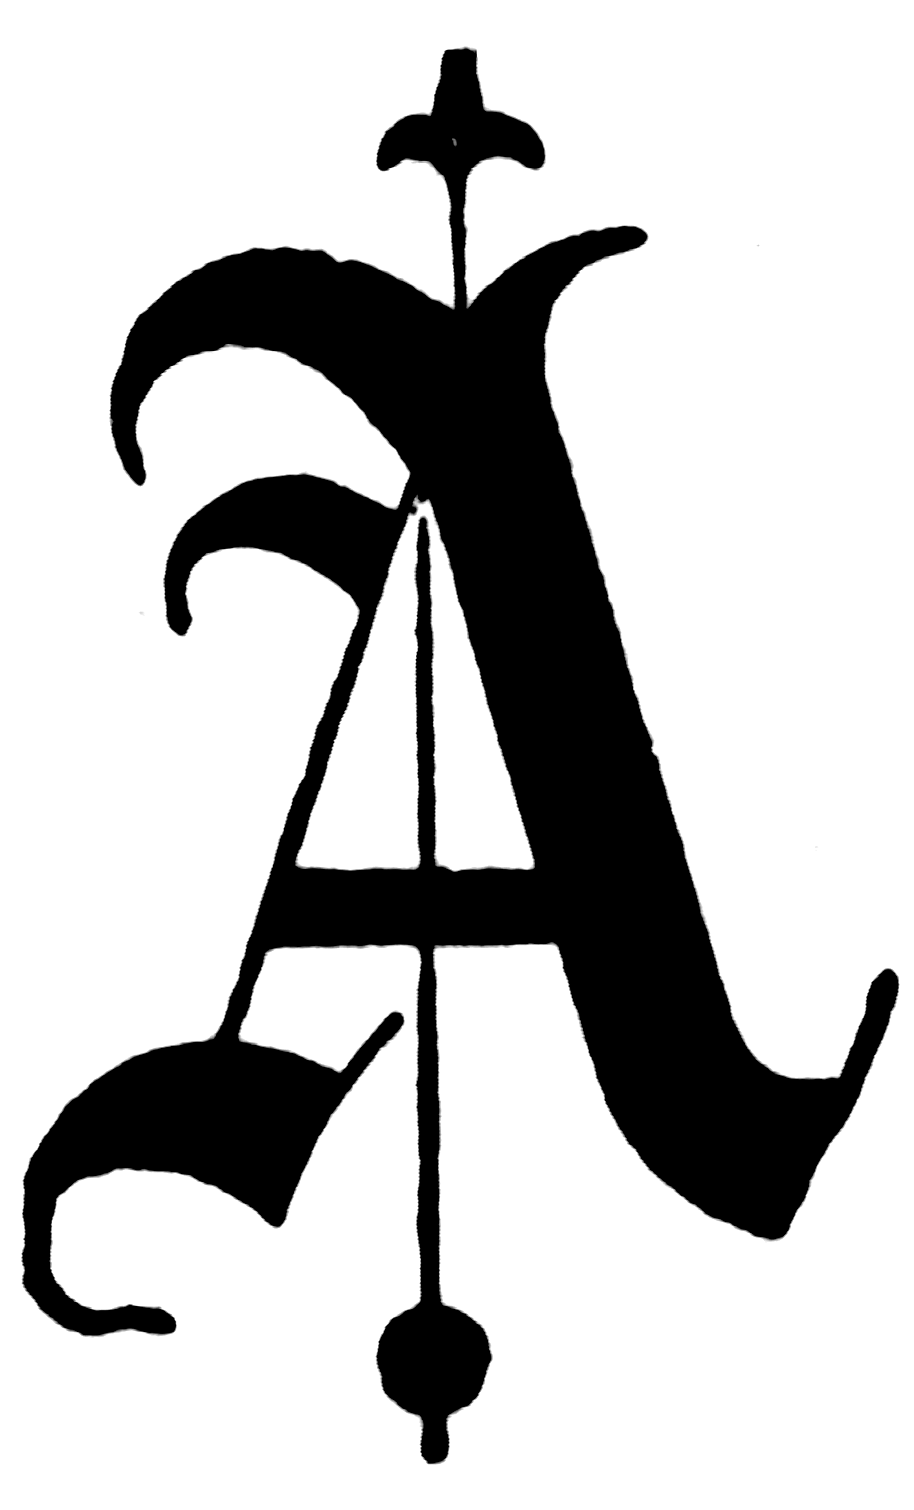 A, Old English title text | ClipArt ETC